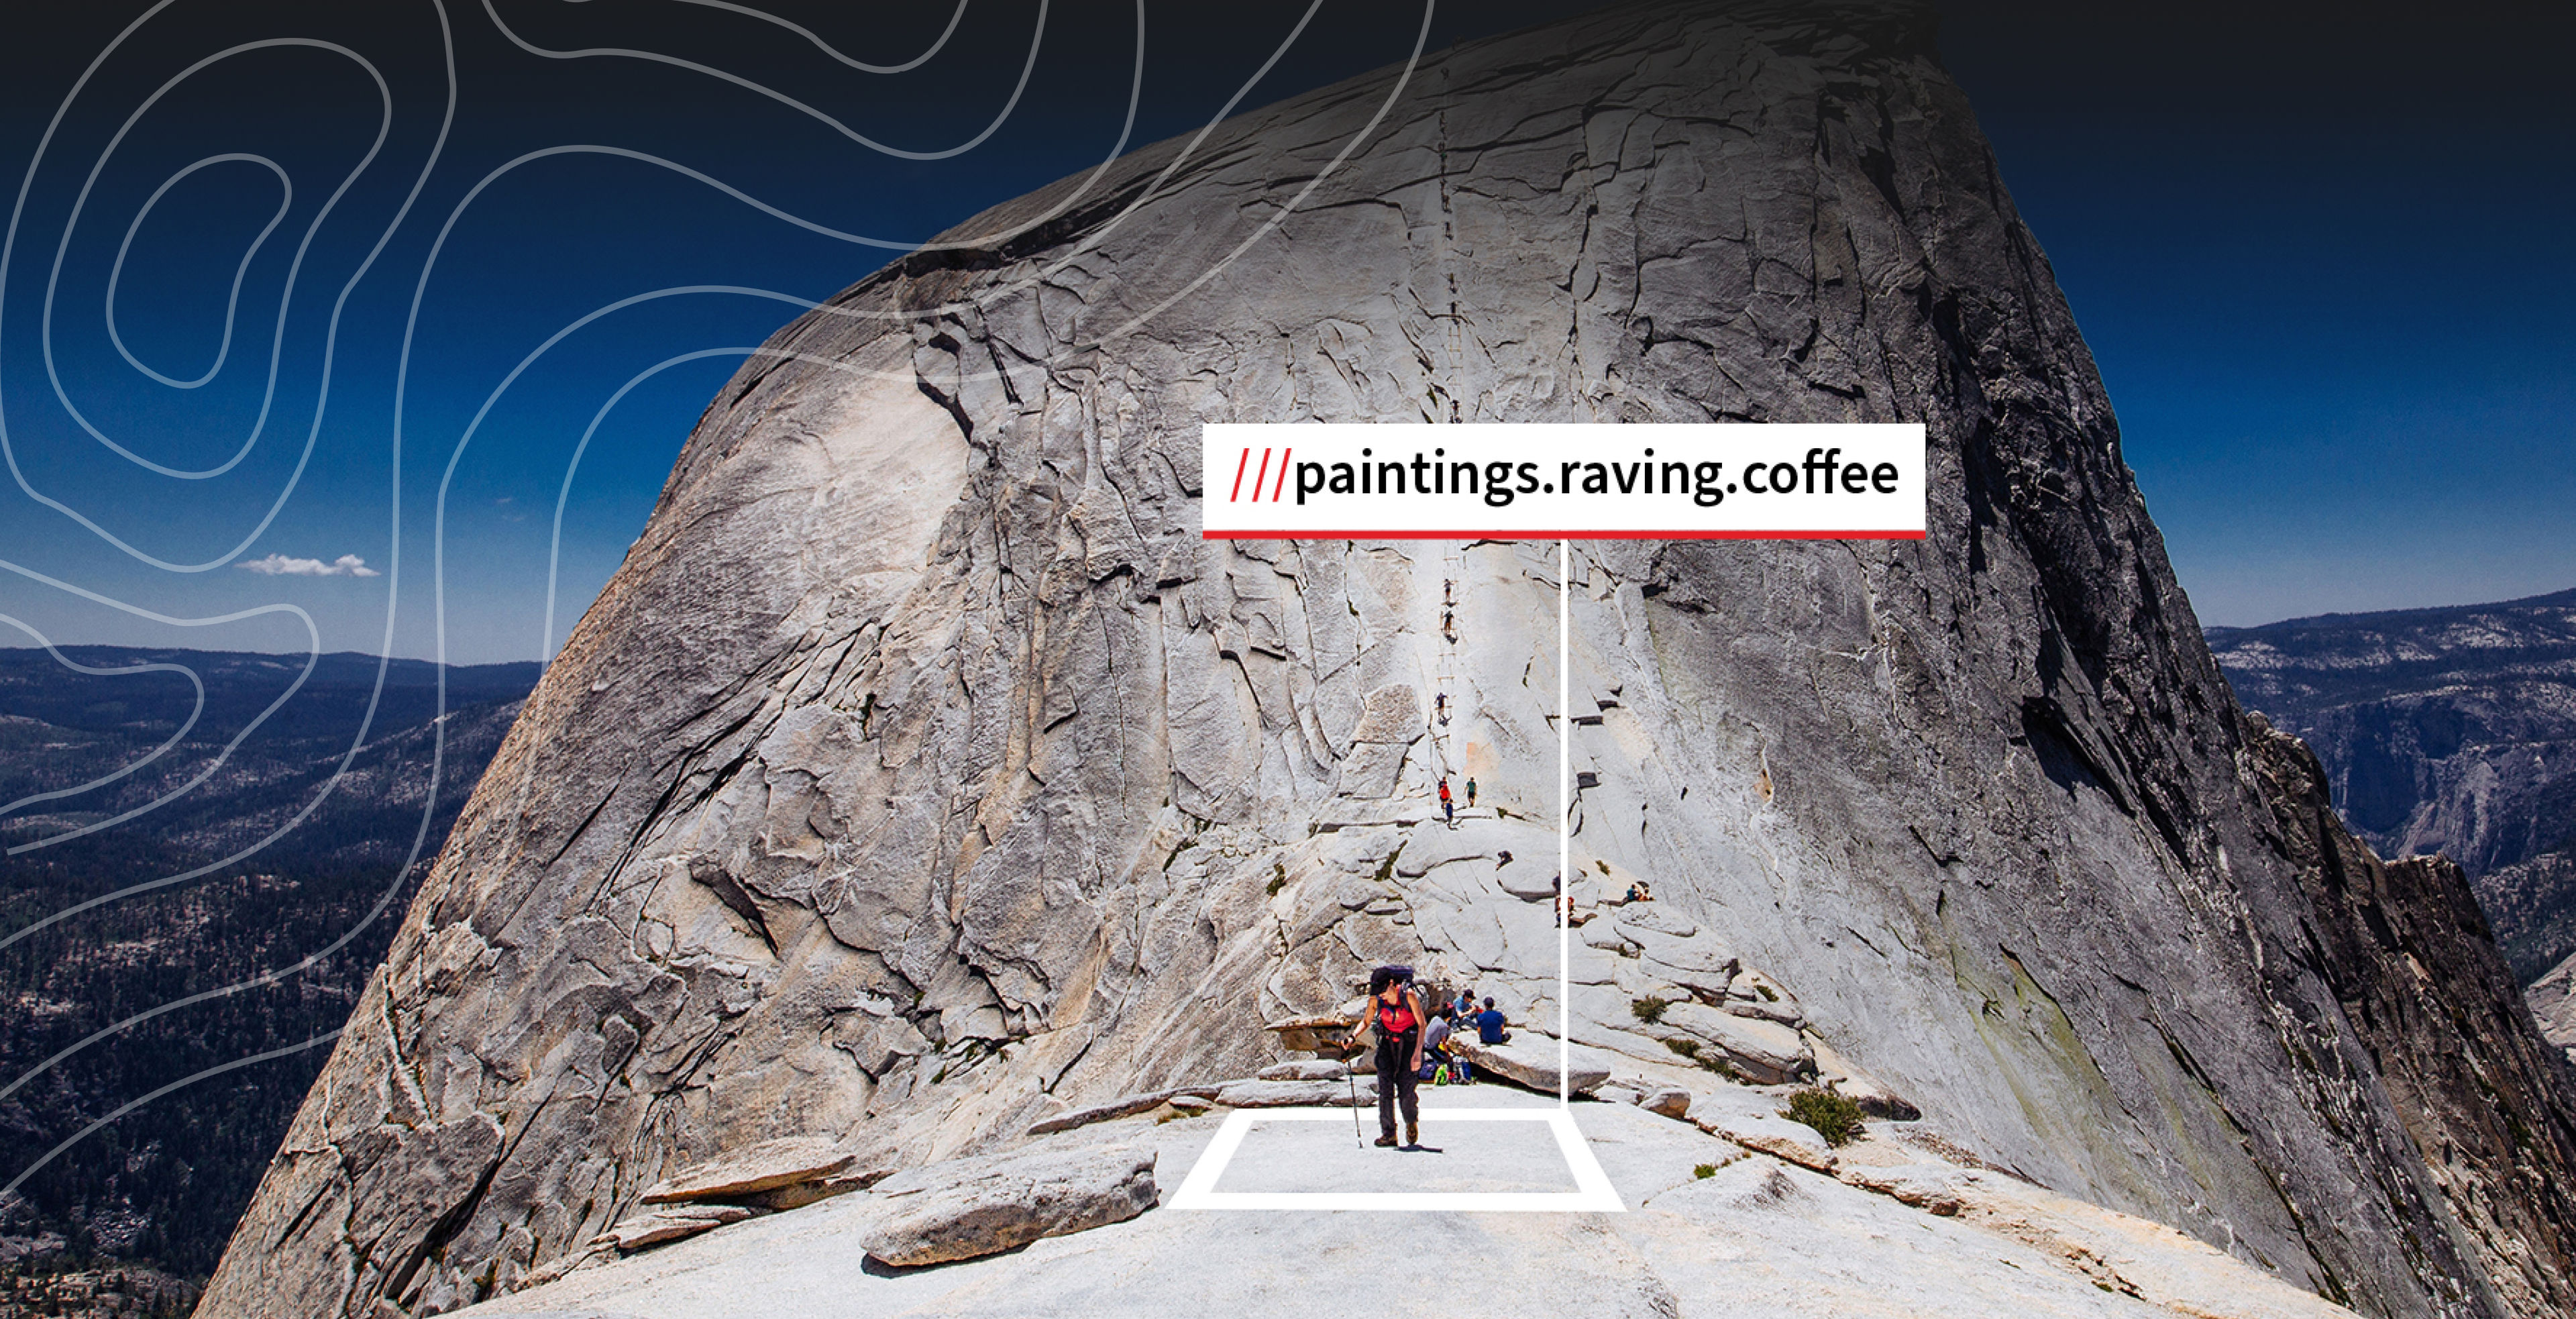 A photo showing a hiker on Half Dome in Yosemite National Park, with a graphic depicting the what3words address for their current location.